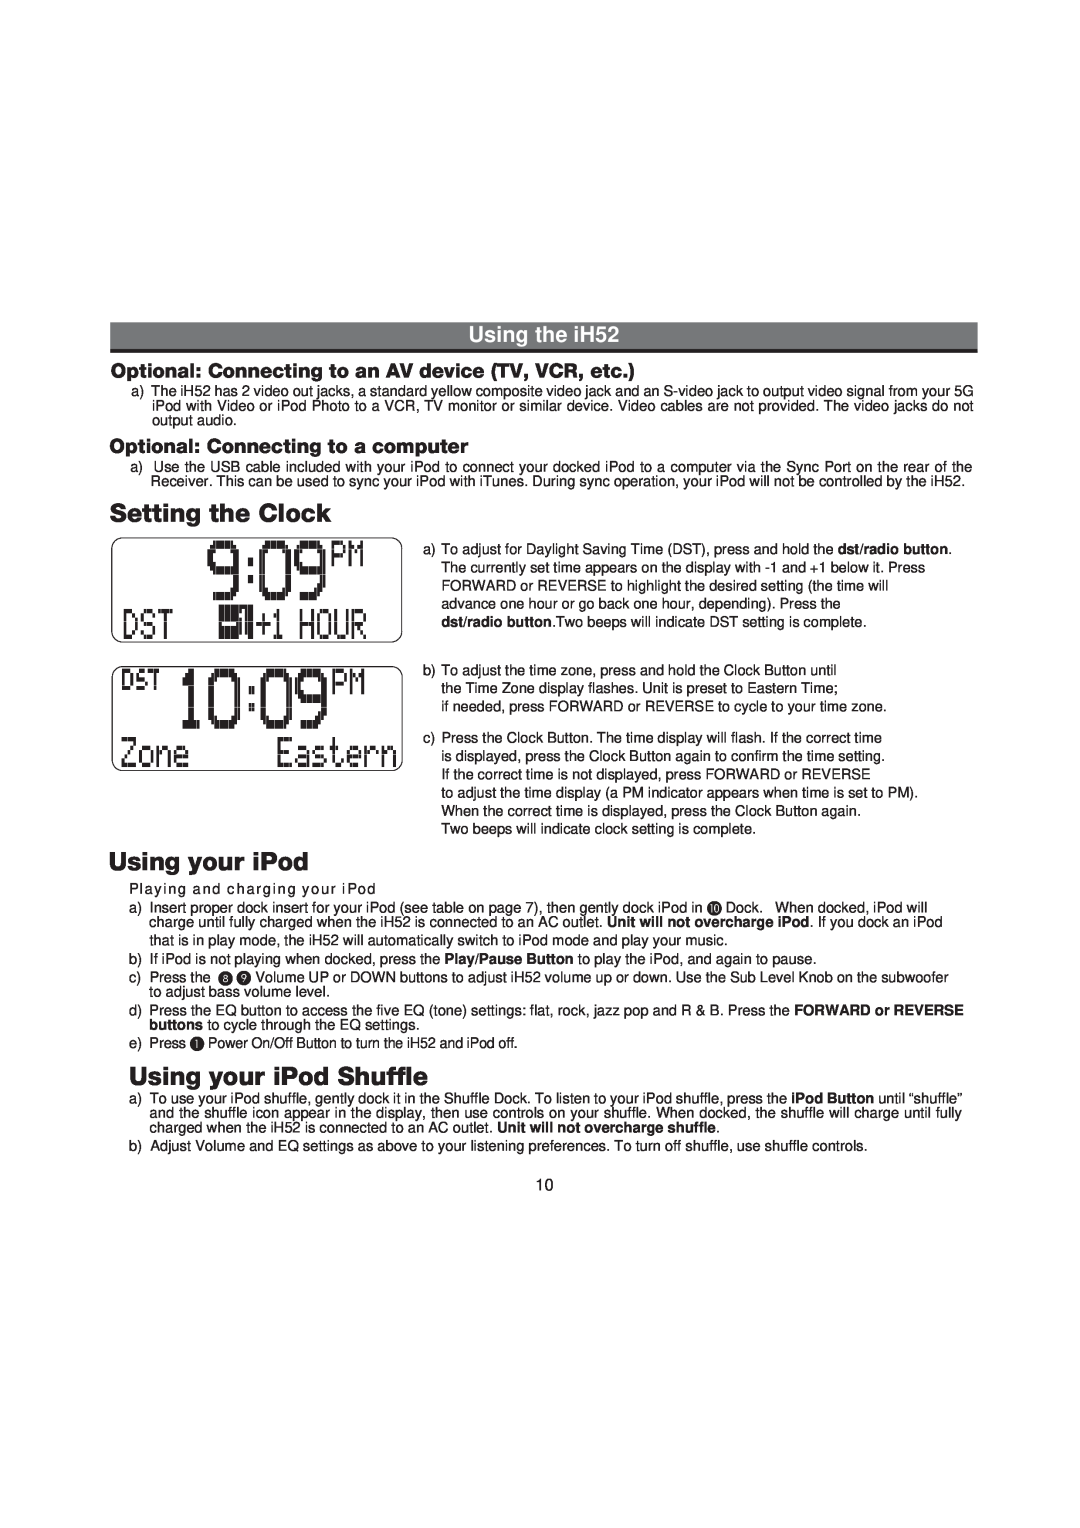 iHome IH52 manual Setting the Clock, Using your iPod Shuffle, Using the iH52, Optional Connecting to a computer 